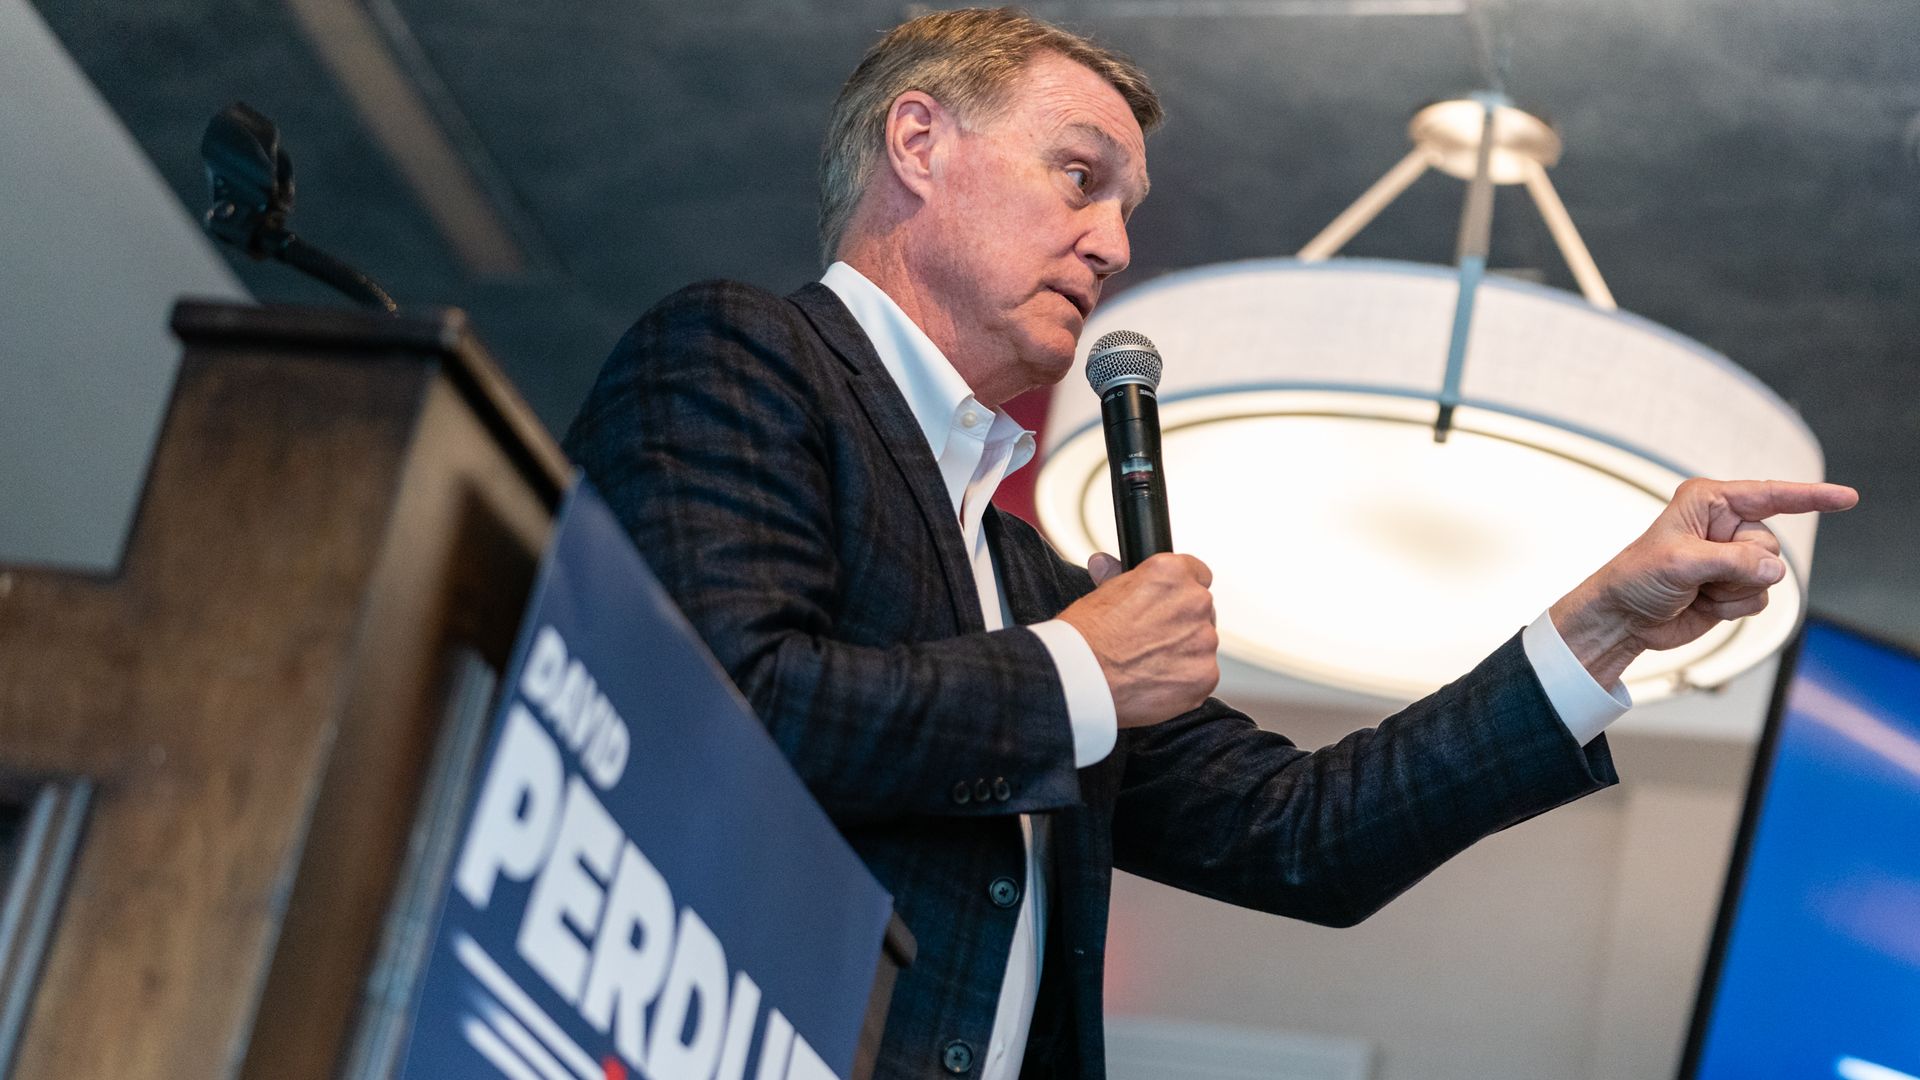 David Perdue at a podium pointing with microphone